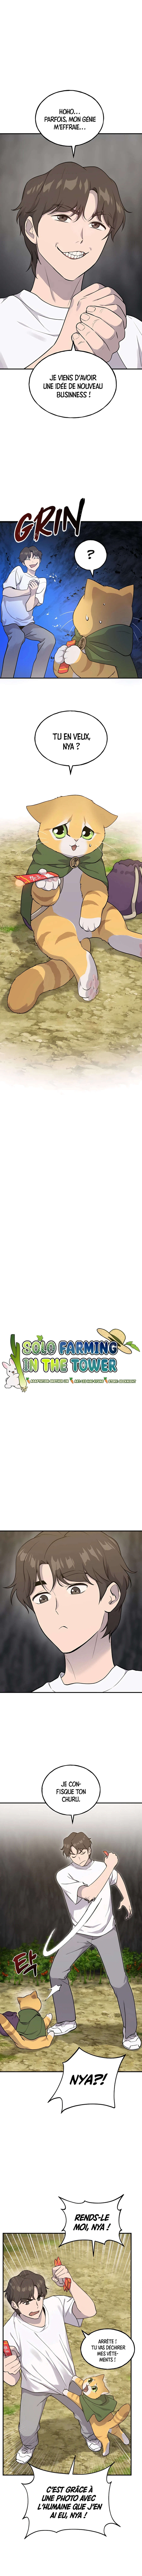 Solo Farming In The Towerimage1